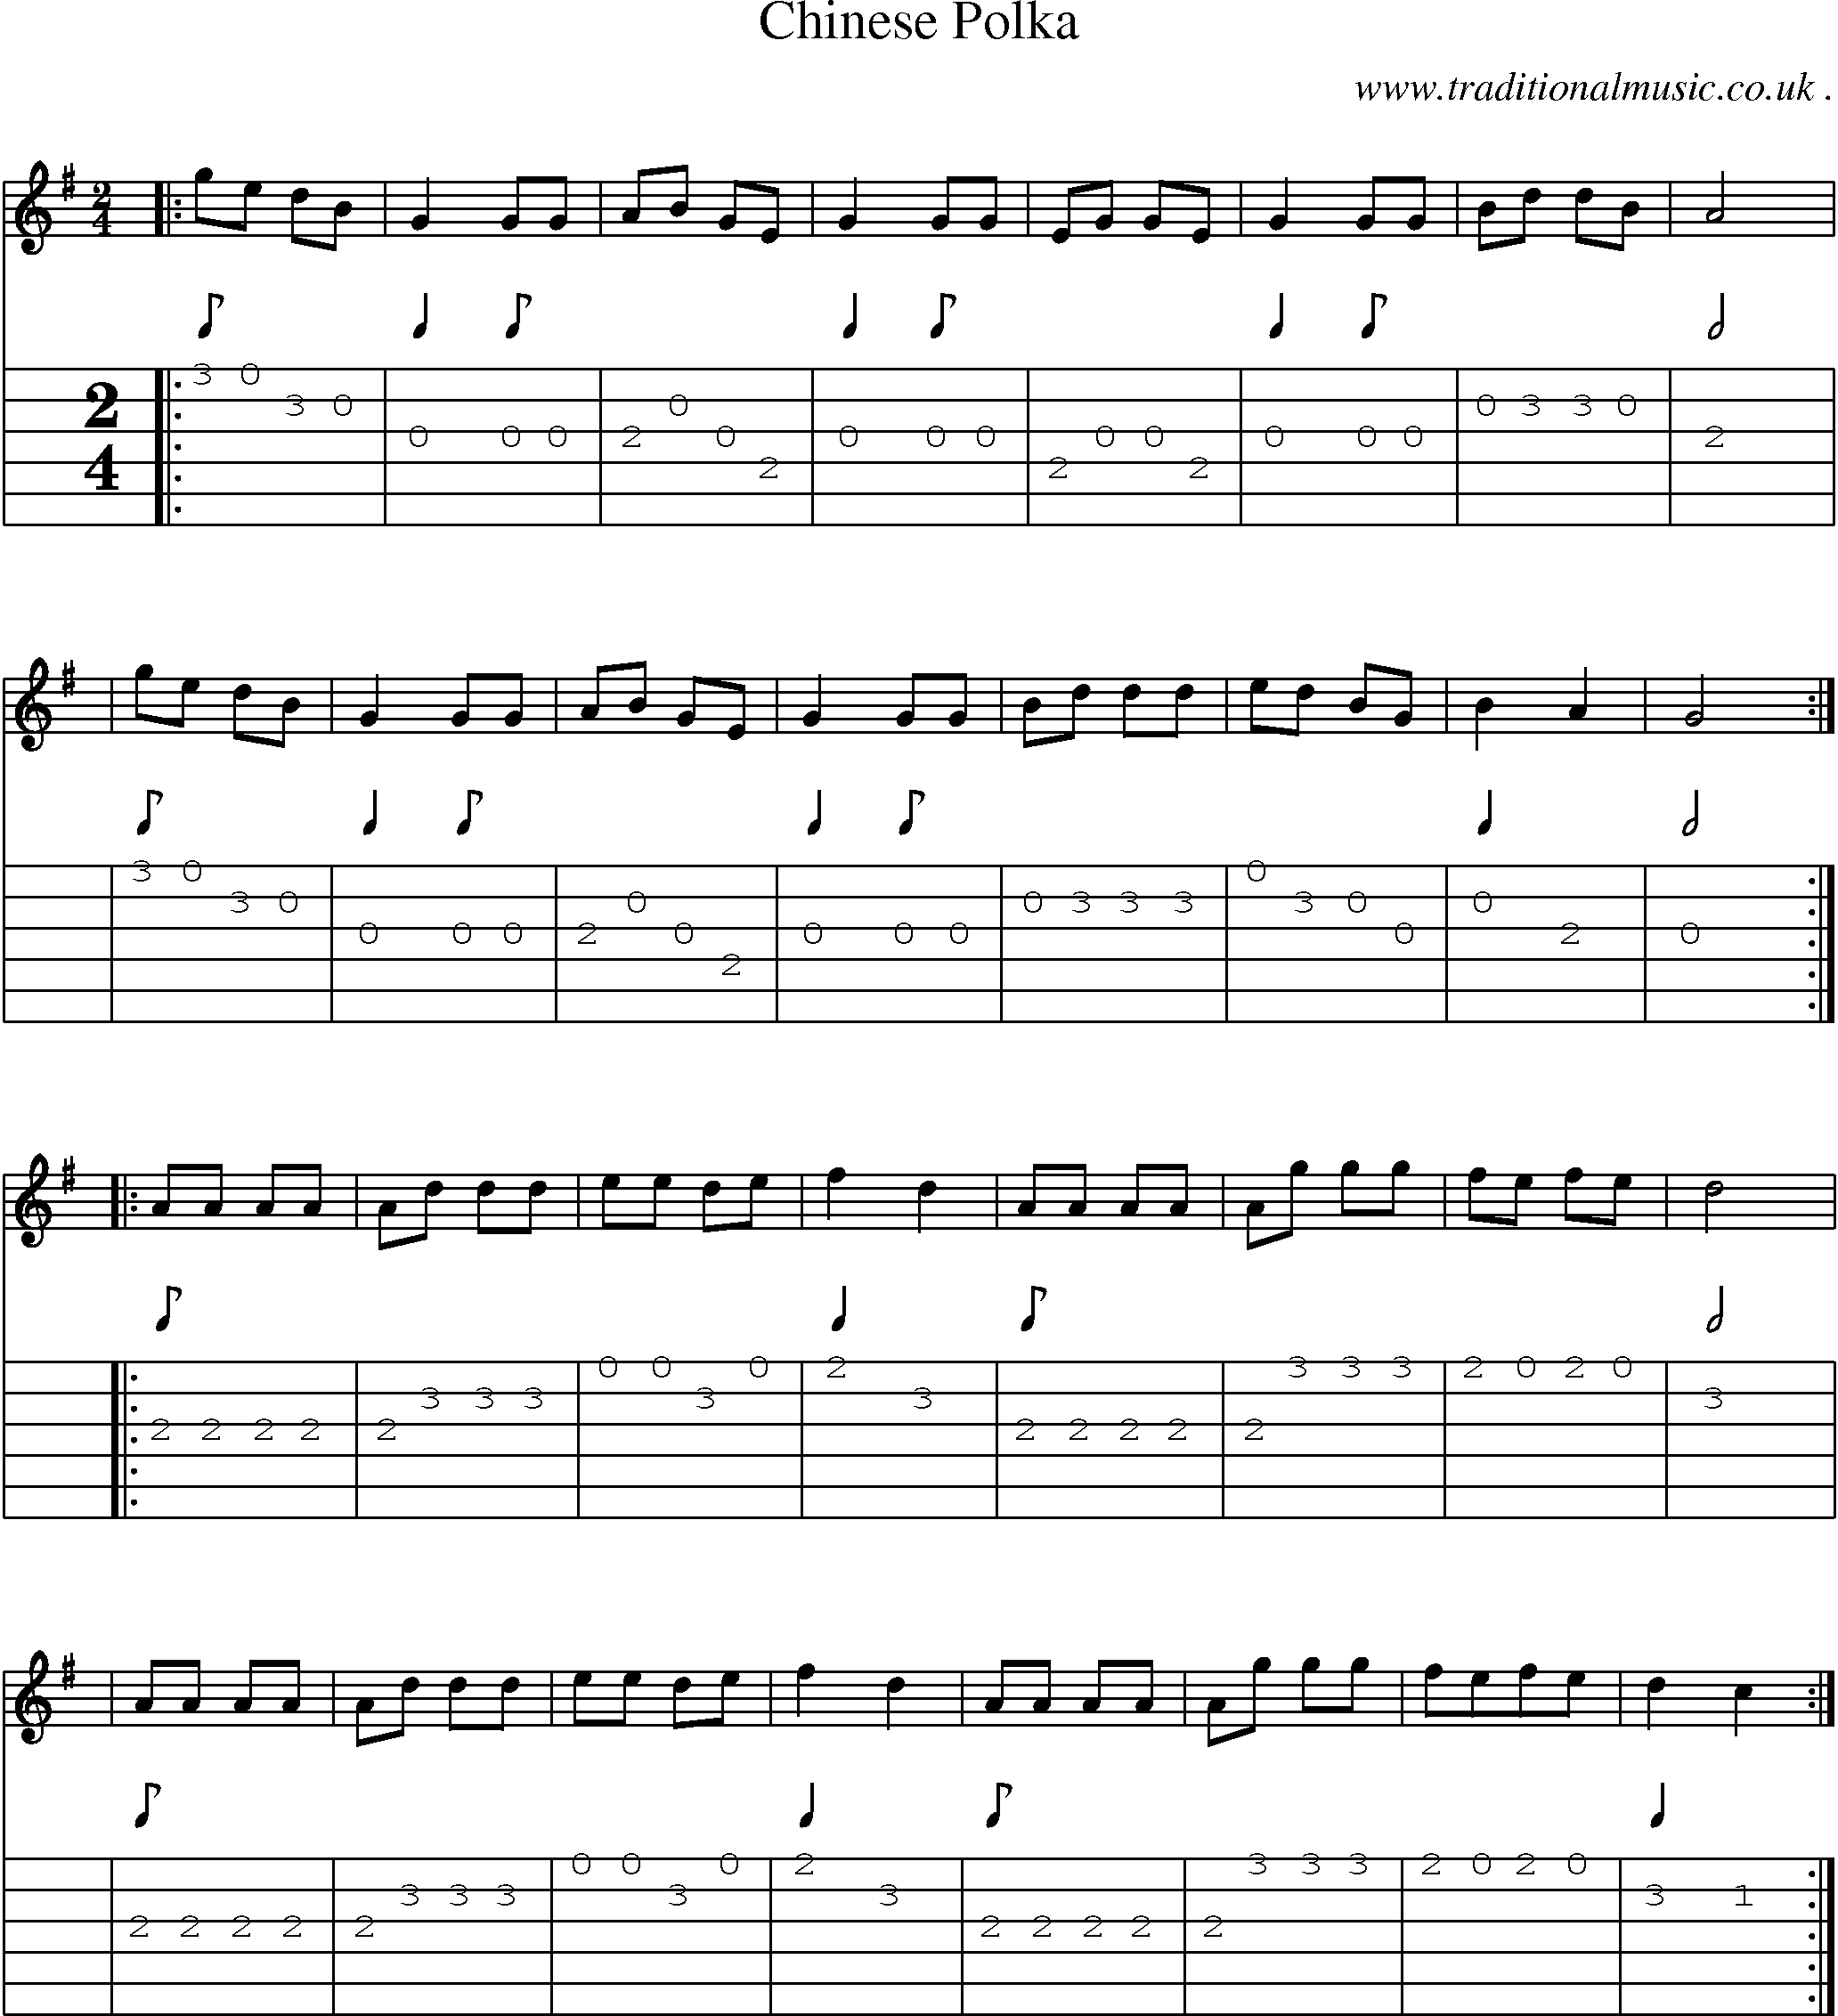 Sheet-Music and Guitar Tabs for Chinese Polka